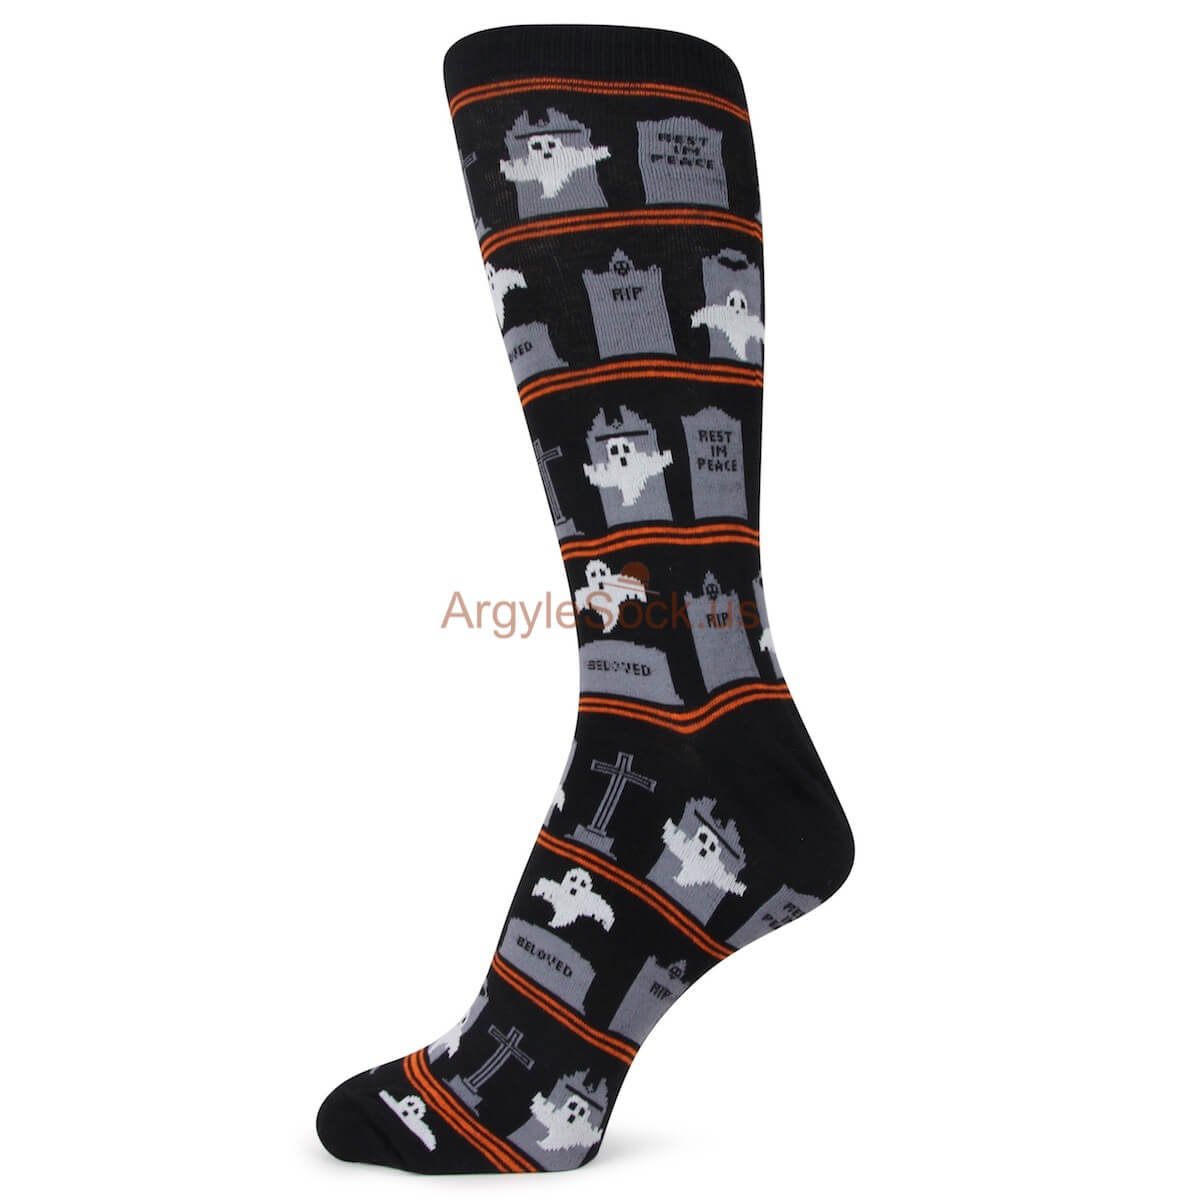 Spooky Night Ghost Themed Foot Apparel for Men